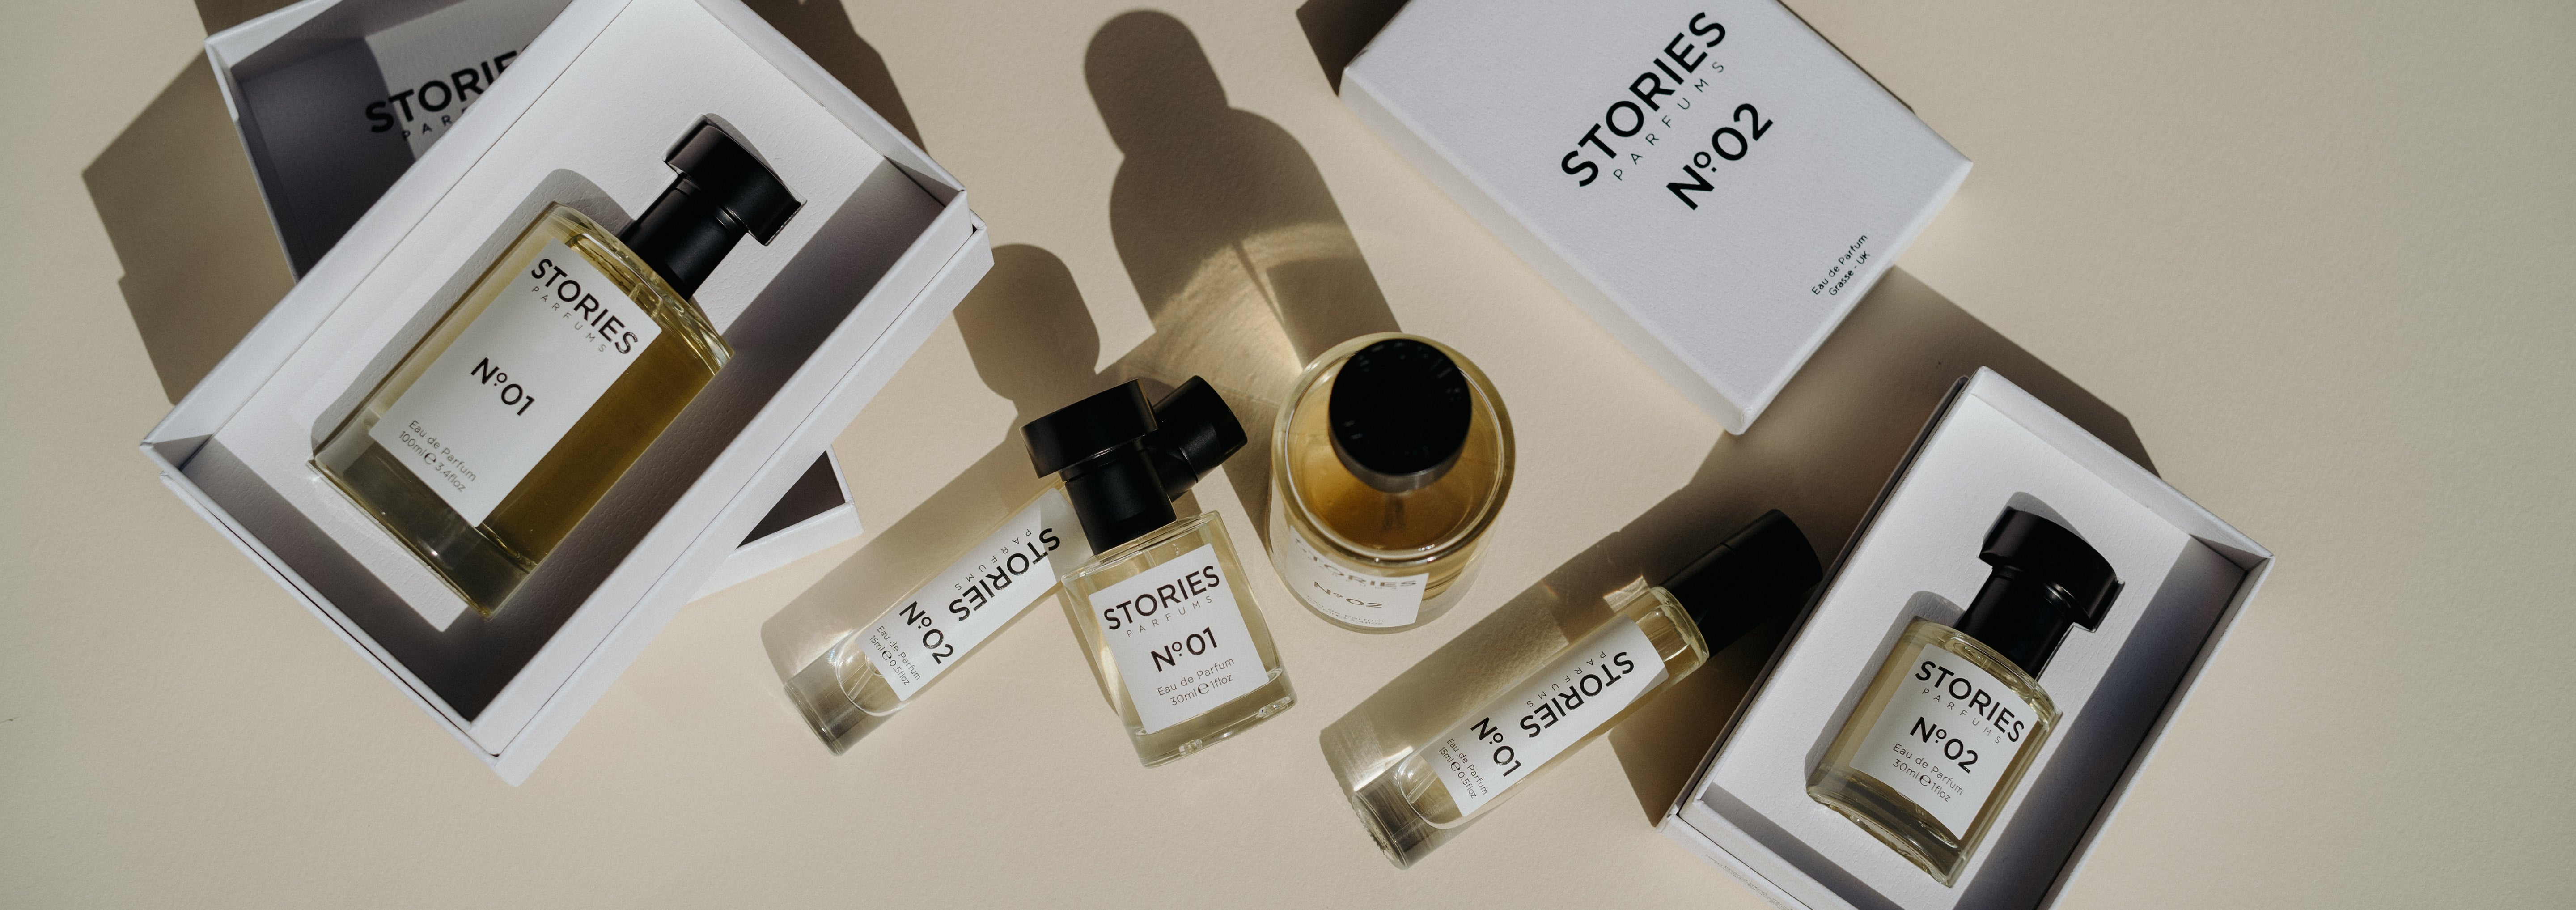 STORIES Parfums bottles and boxes artistically displayed laying on their sides